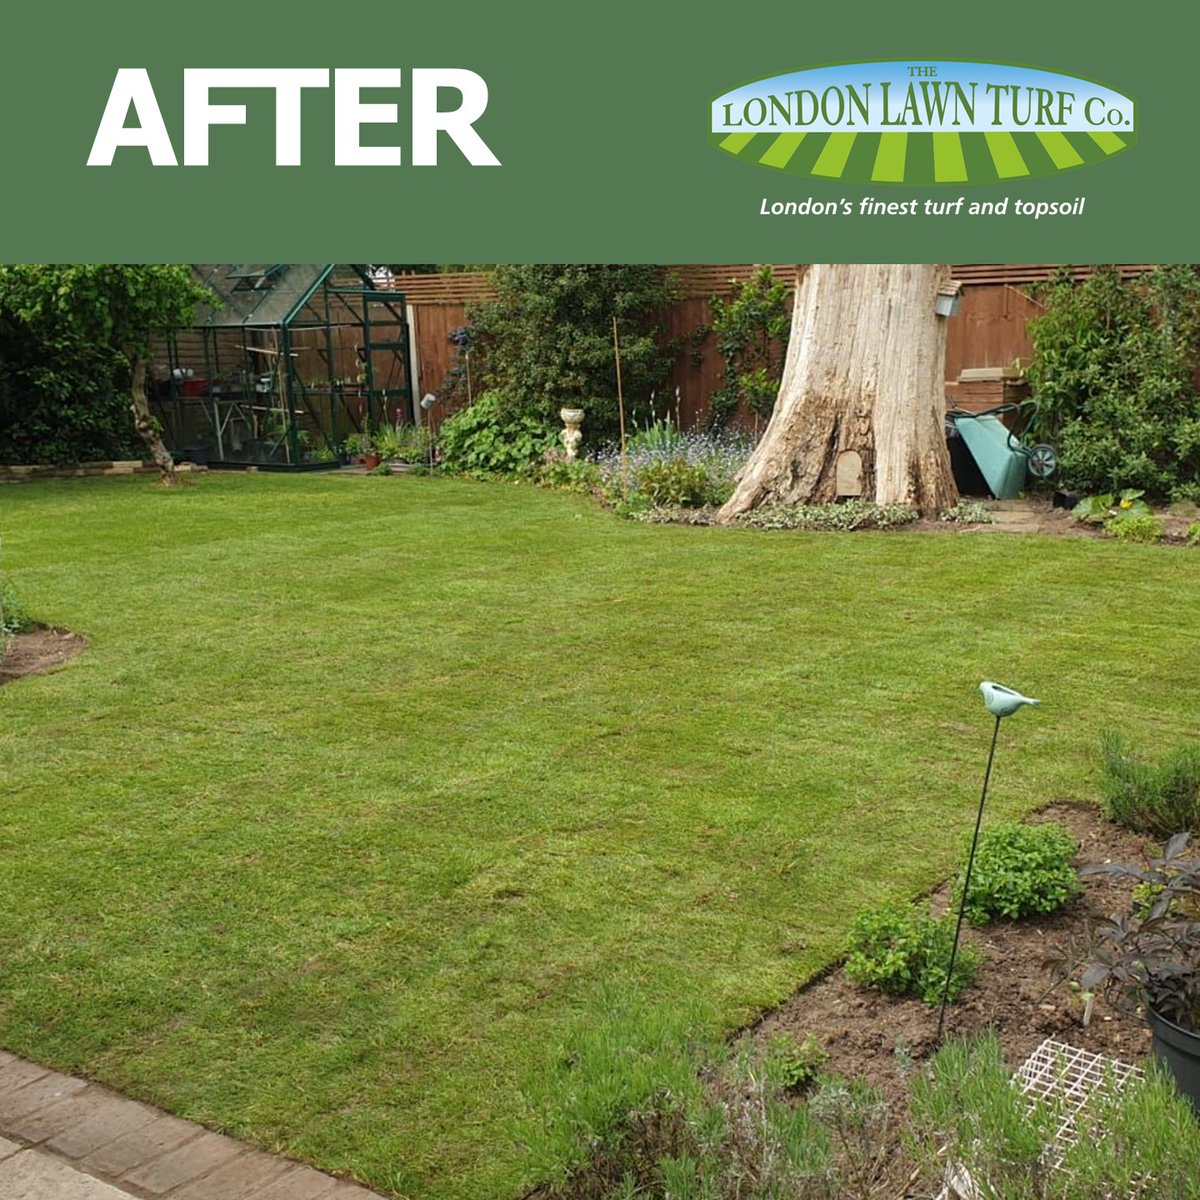 A much-needed facelift for this garden in Shepperton, all ready in time for summer.☀️

ow.ly/ncQR50OGCbQ

#landscaper #landscapers #landscapinglondon #lawn #lawnturf #gardening #gardeningideas #gardenlife #gardeninspiration #gardens #landscaping #lawnturf